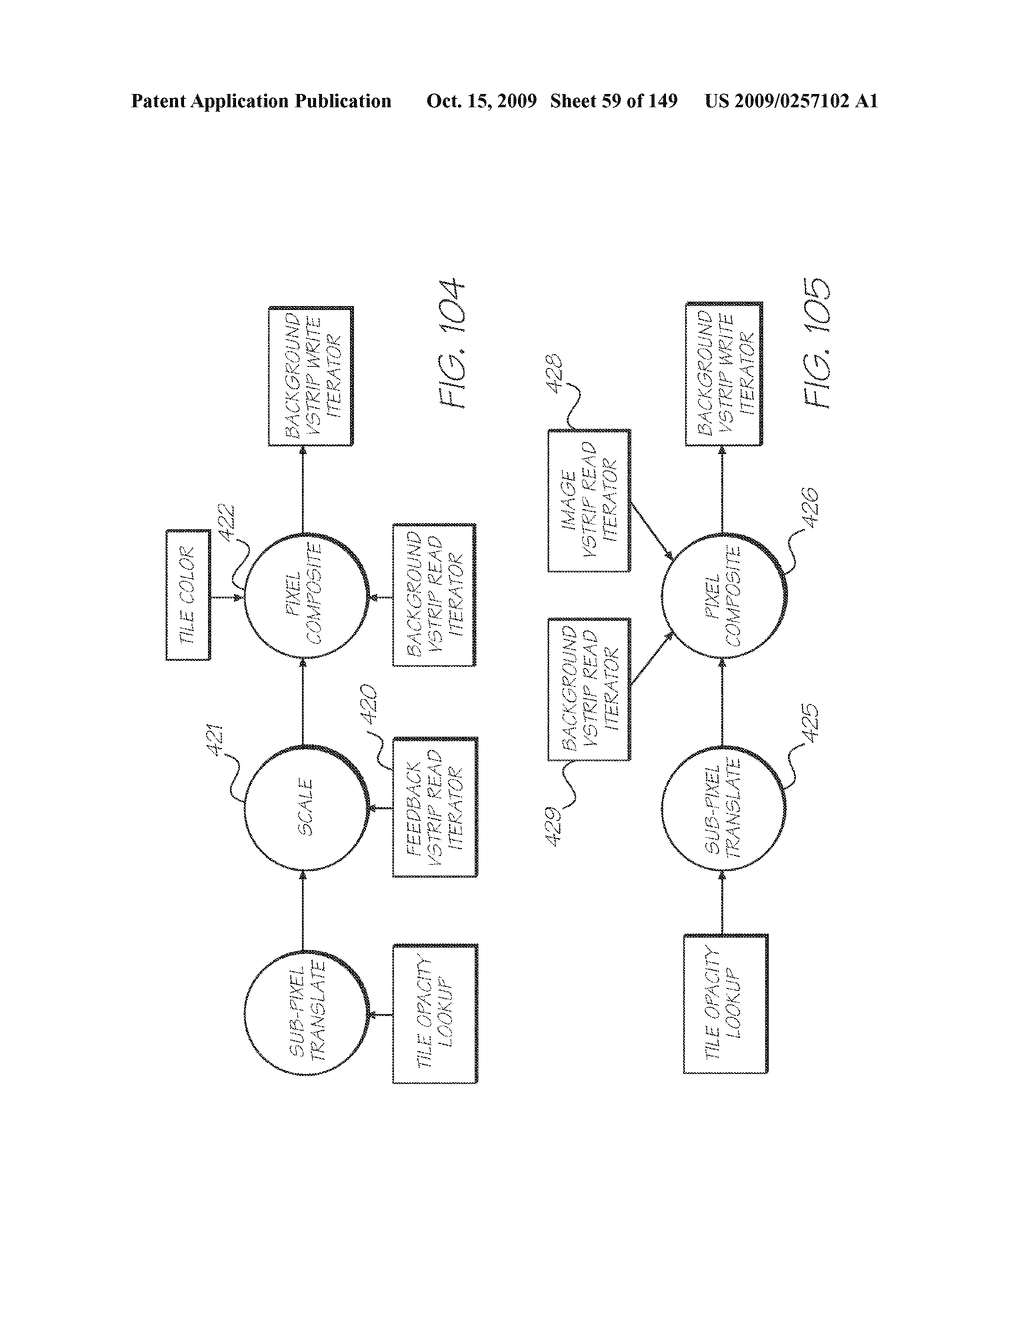 IMAGE PROCESSING APPARATUS HAVING CARD READER FOR APPLYING EFFECTS STORED ON A CARD TO A STORED IMAGE - diagram, schematic, and image 60